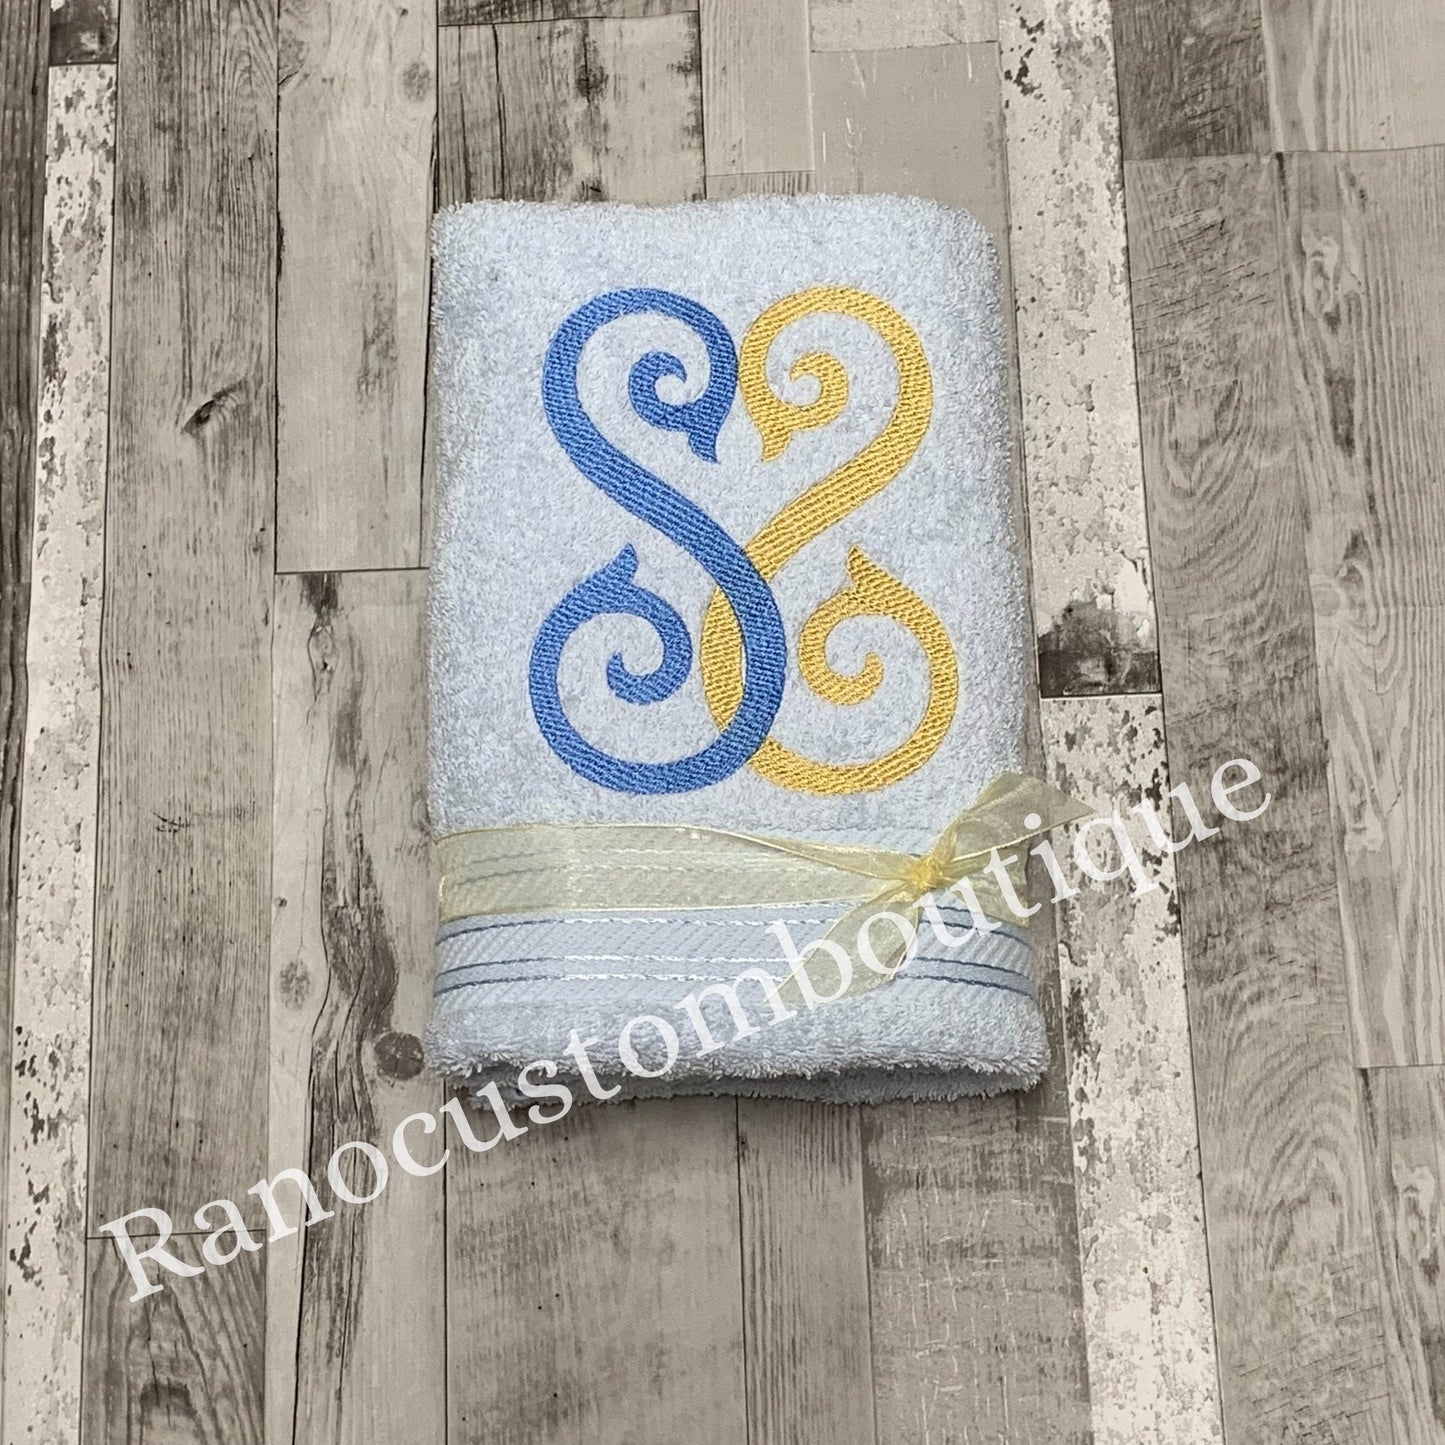 Personalized Embroidered Towel, Monogrammed Towel, Embroidered Design, Wedding Gifts, Interlocking Double Letter Monogram